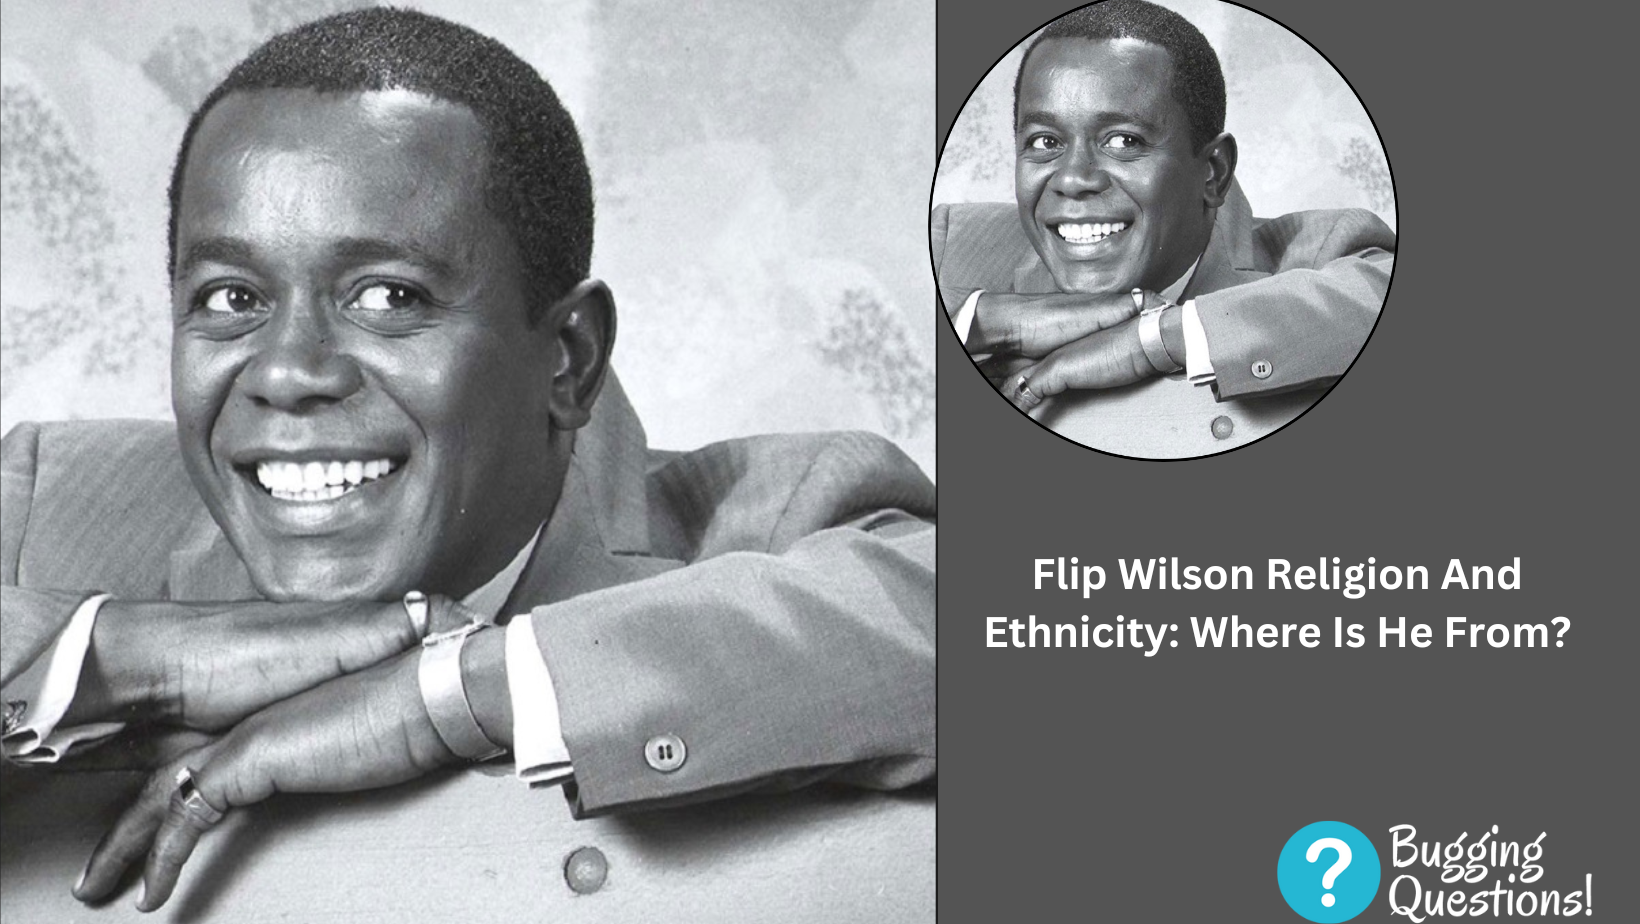 Flip Wilson Religion And Ethnicity: Where Is He From?